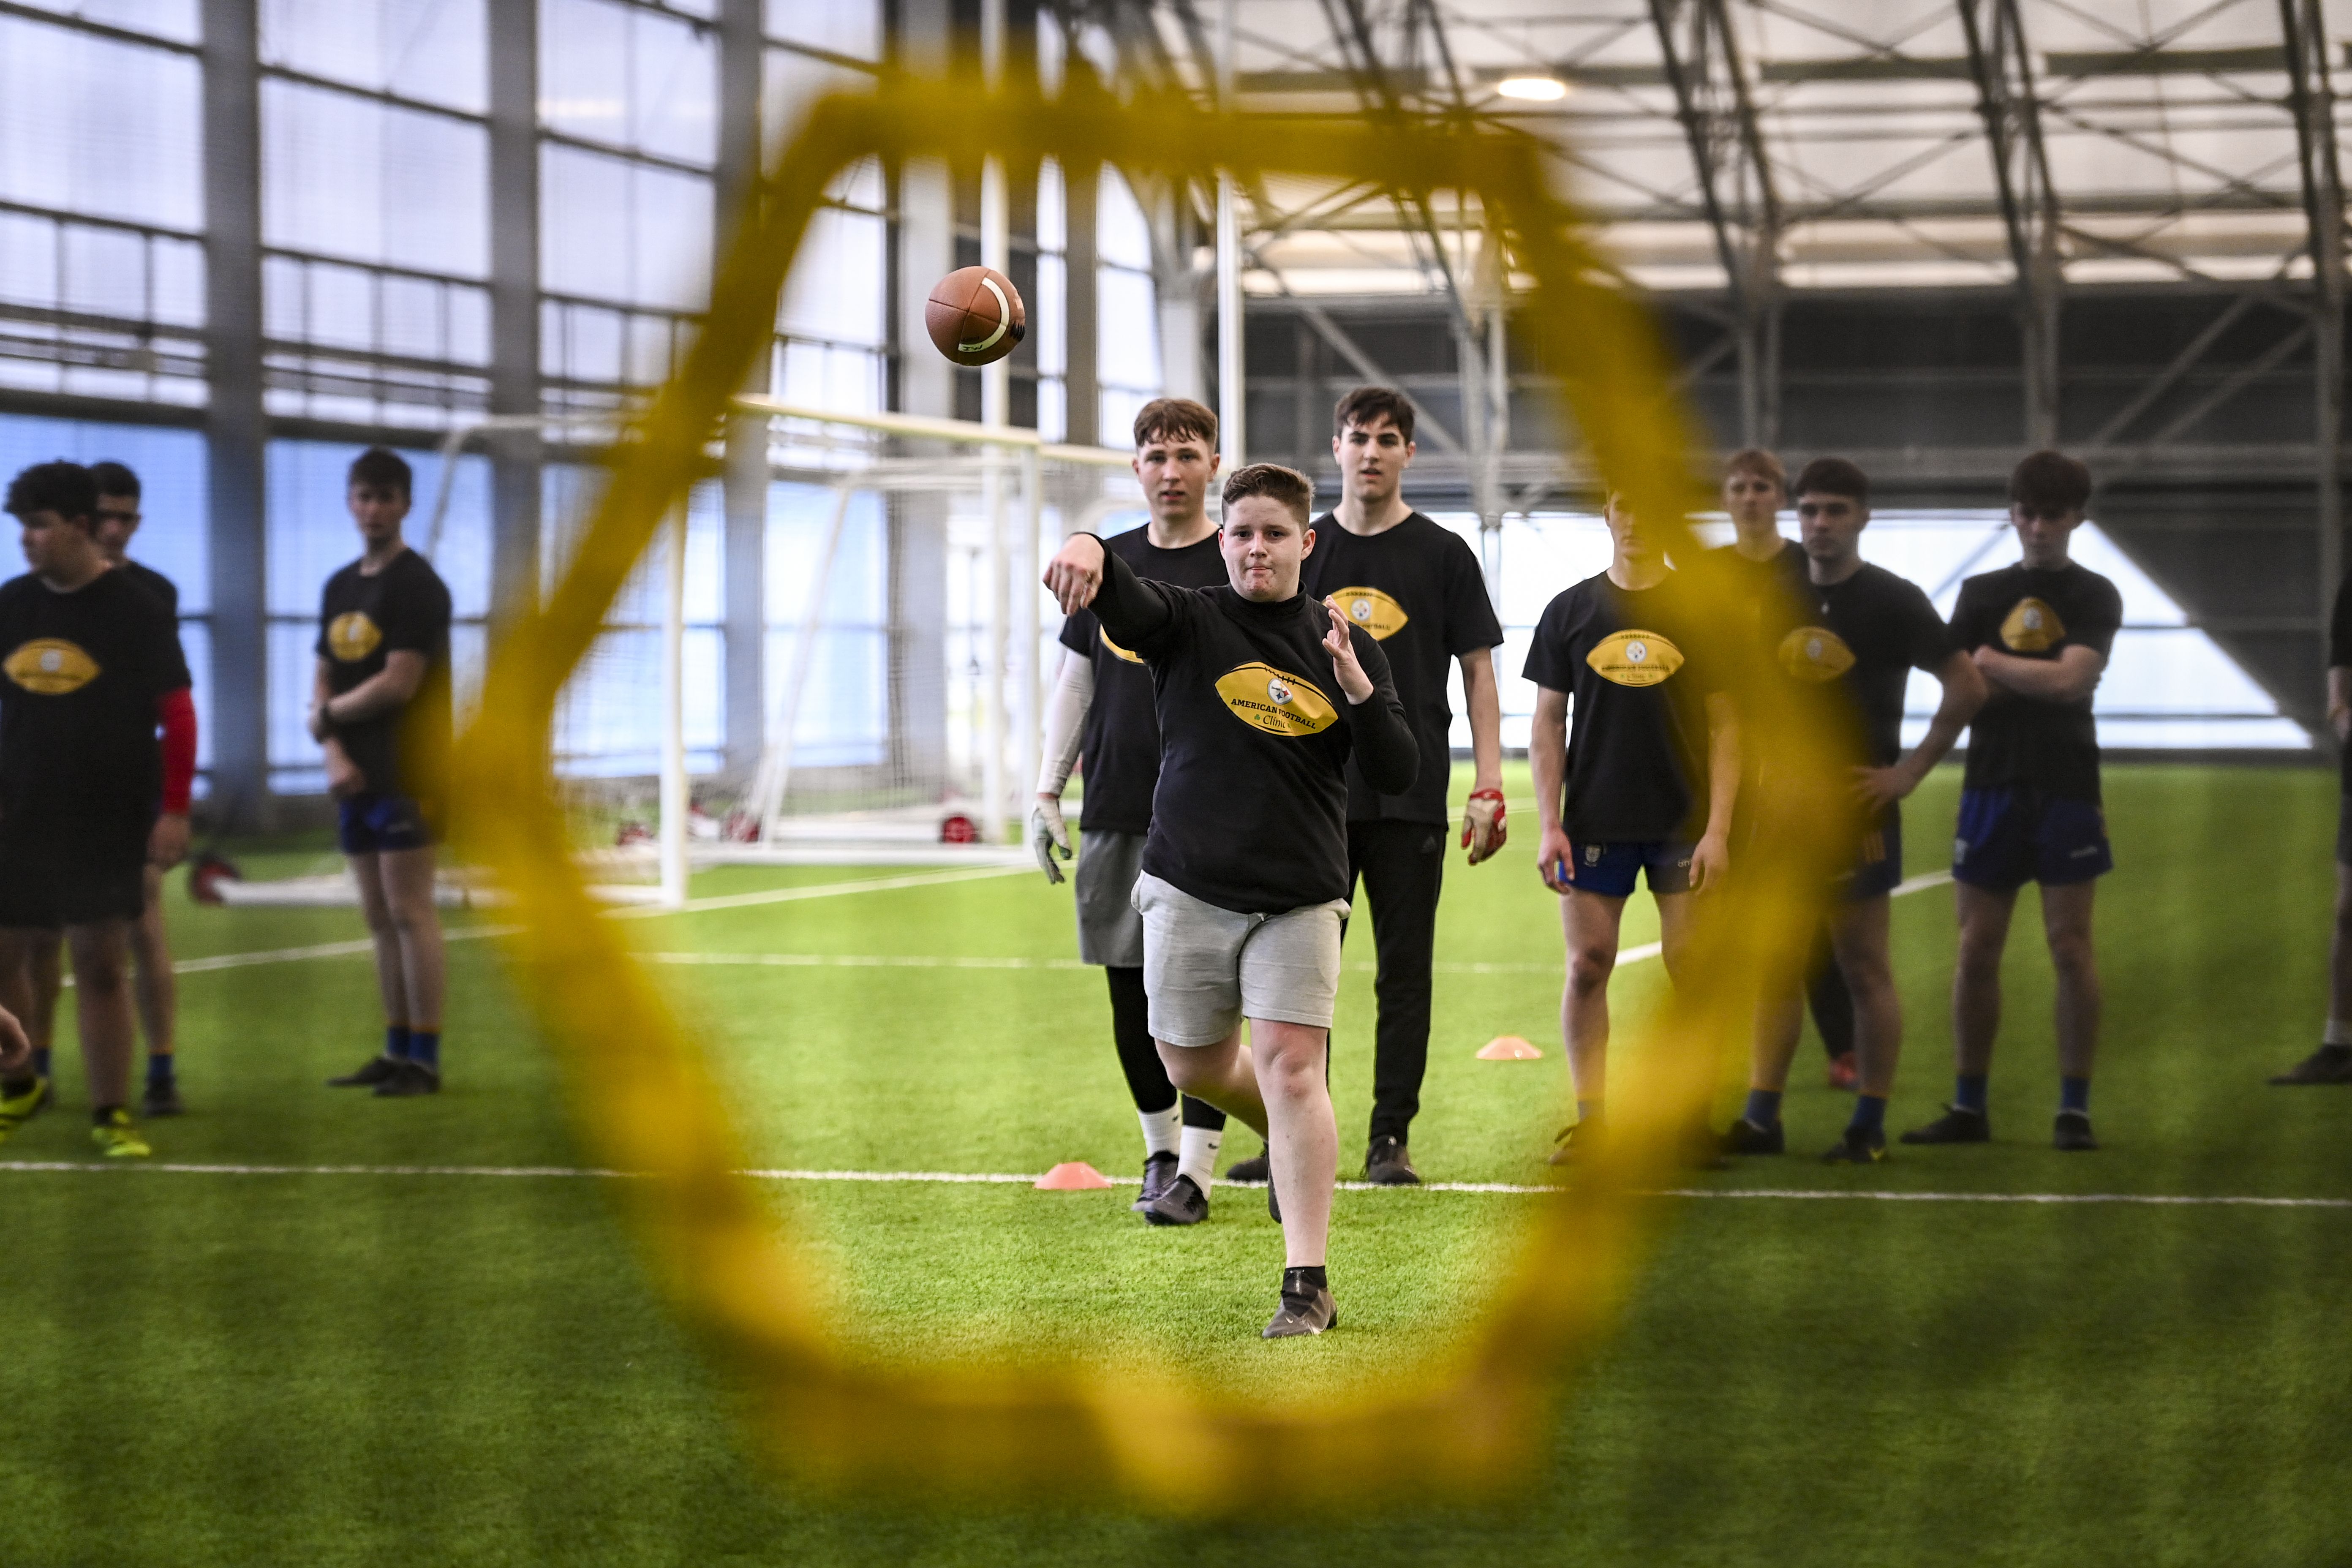 Aspiring players between the ages of 9 and 18 will be put through their paces by current Steelers and American Football Ireland coaches